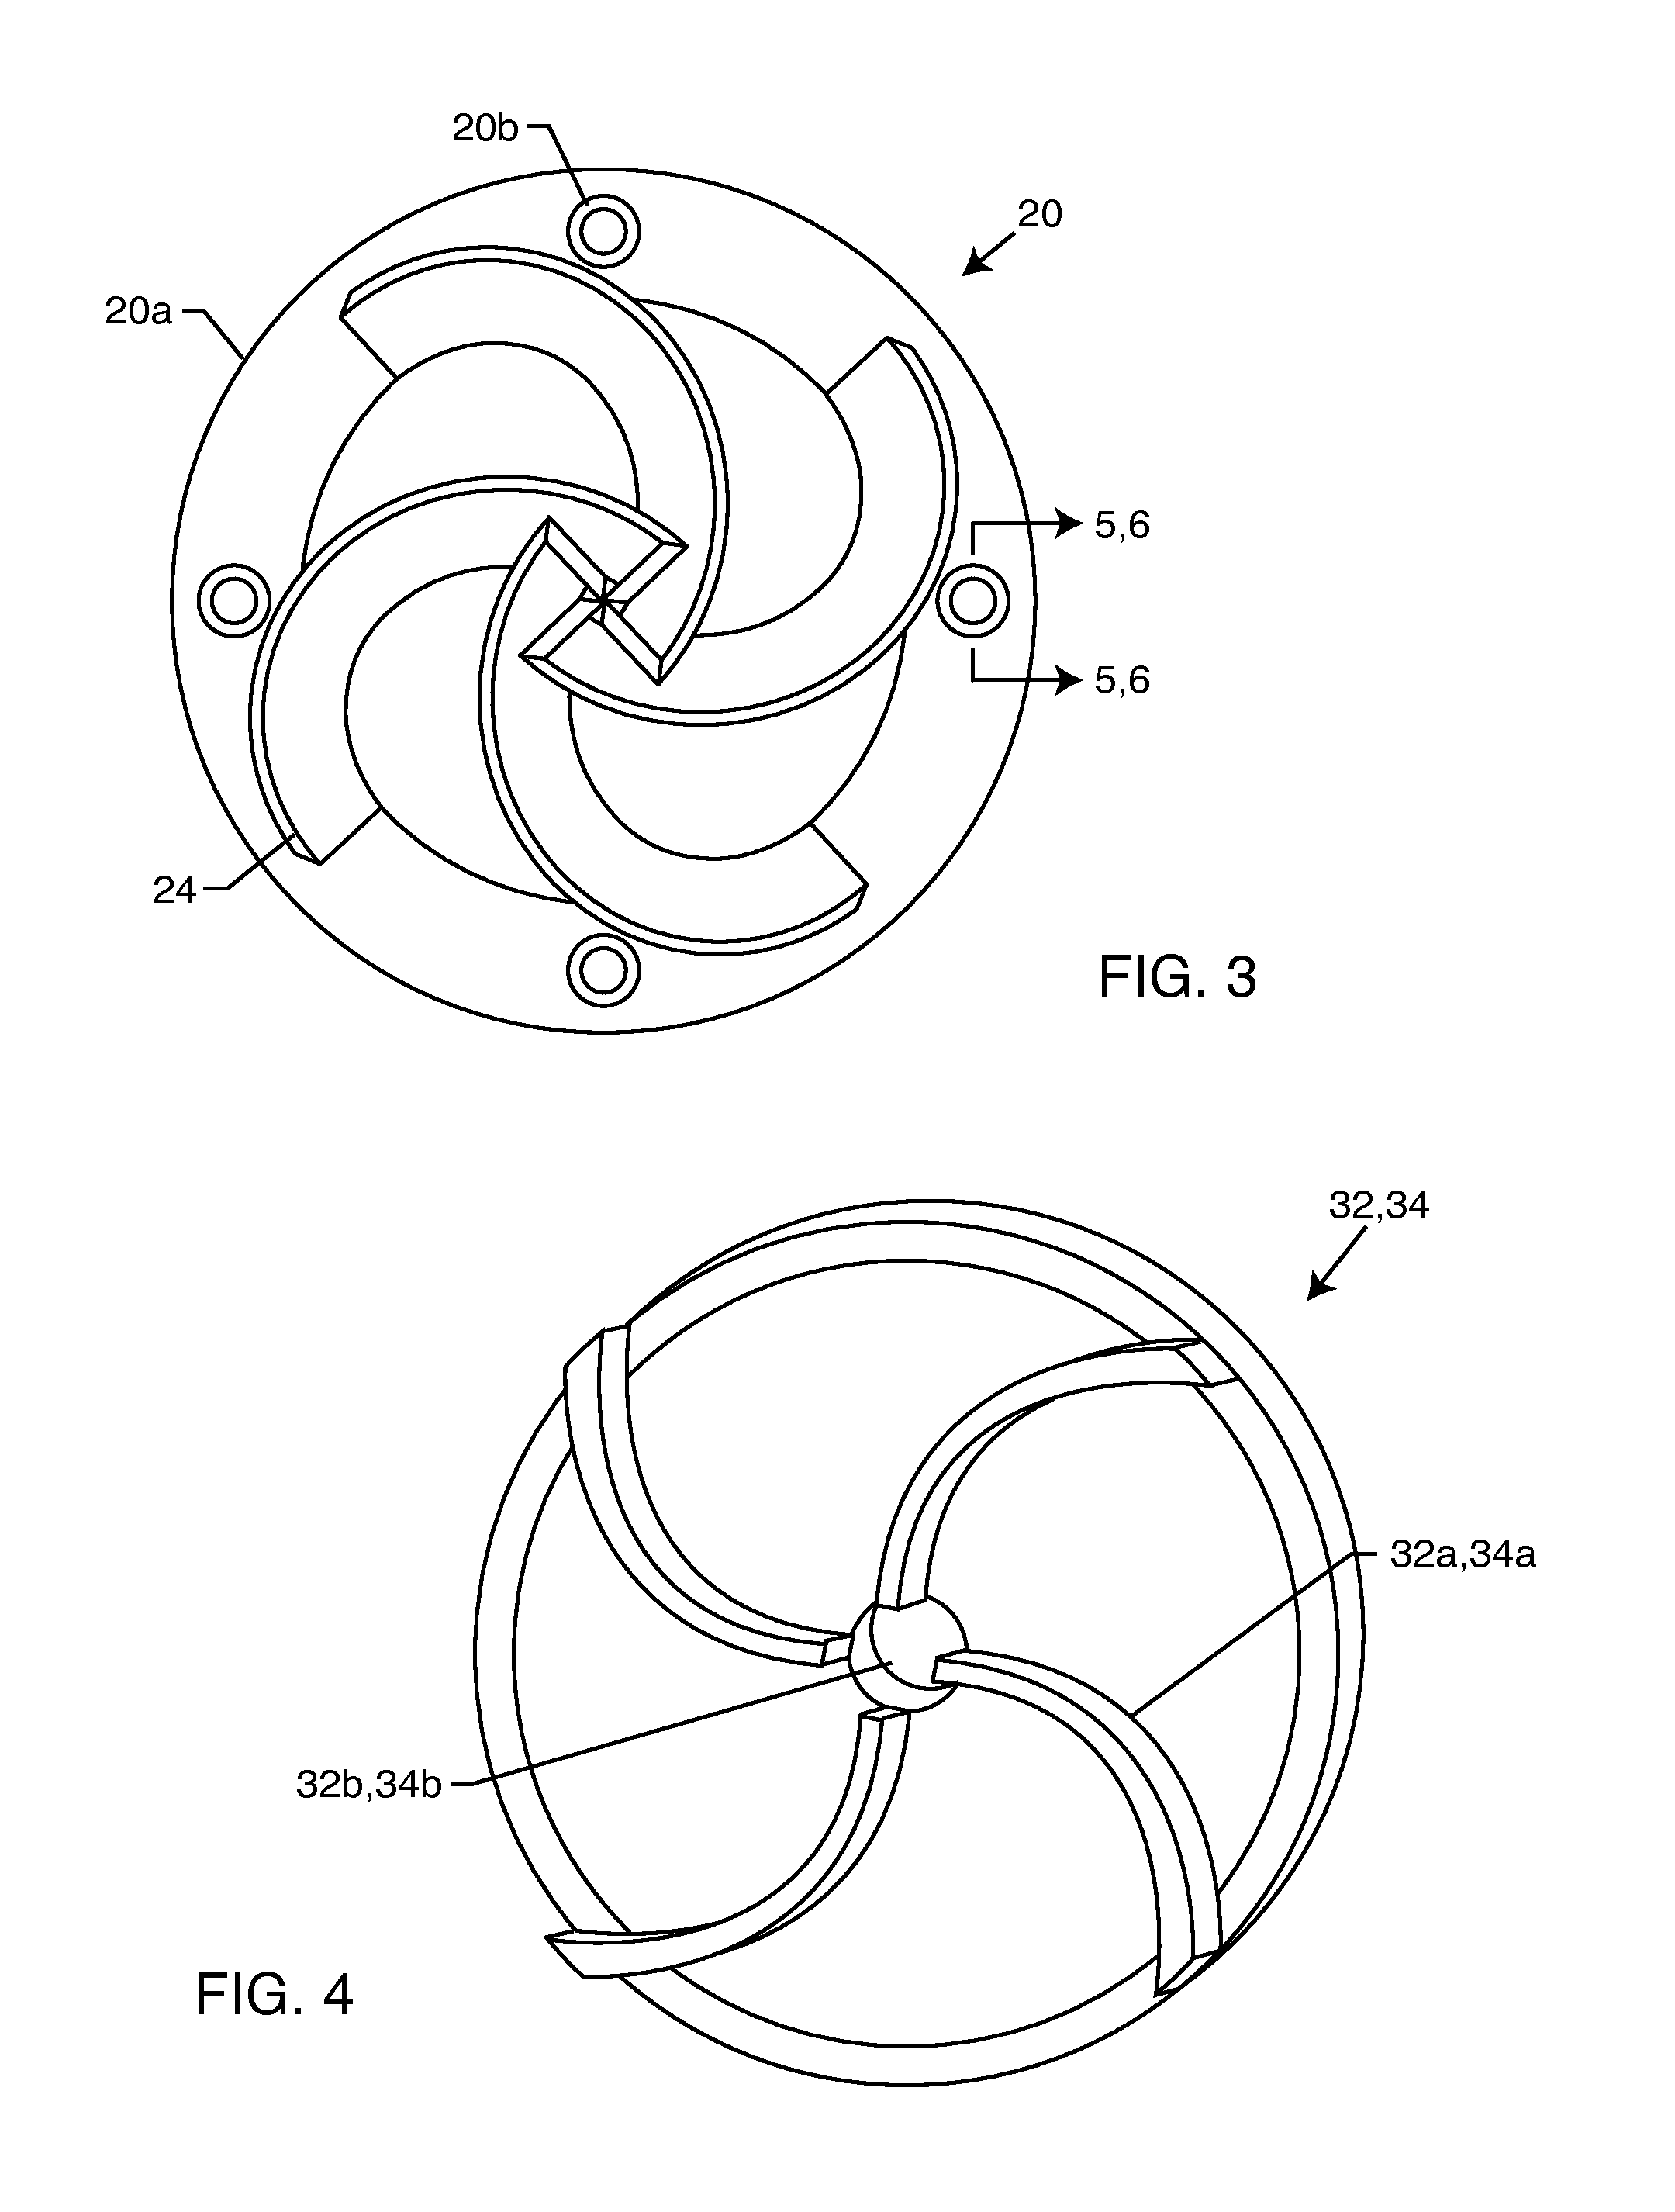 Process for producing biodiesel through lower molecular weight alcohol-targeted cavitation